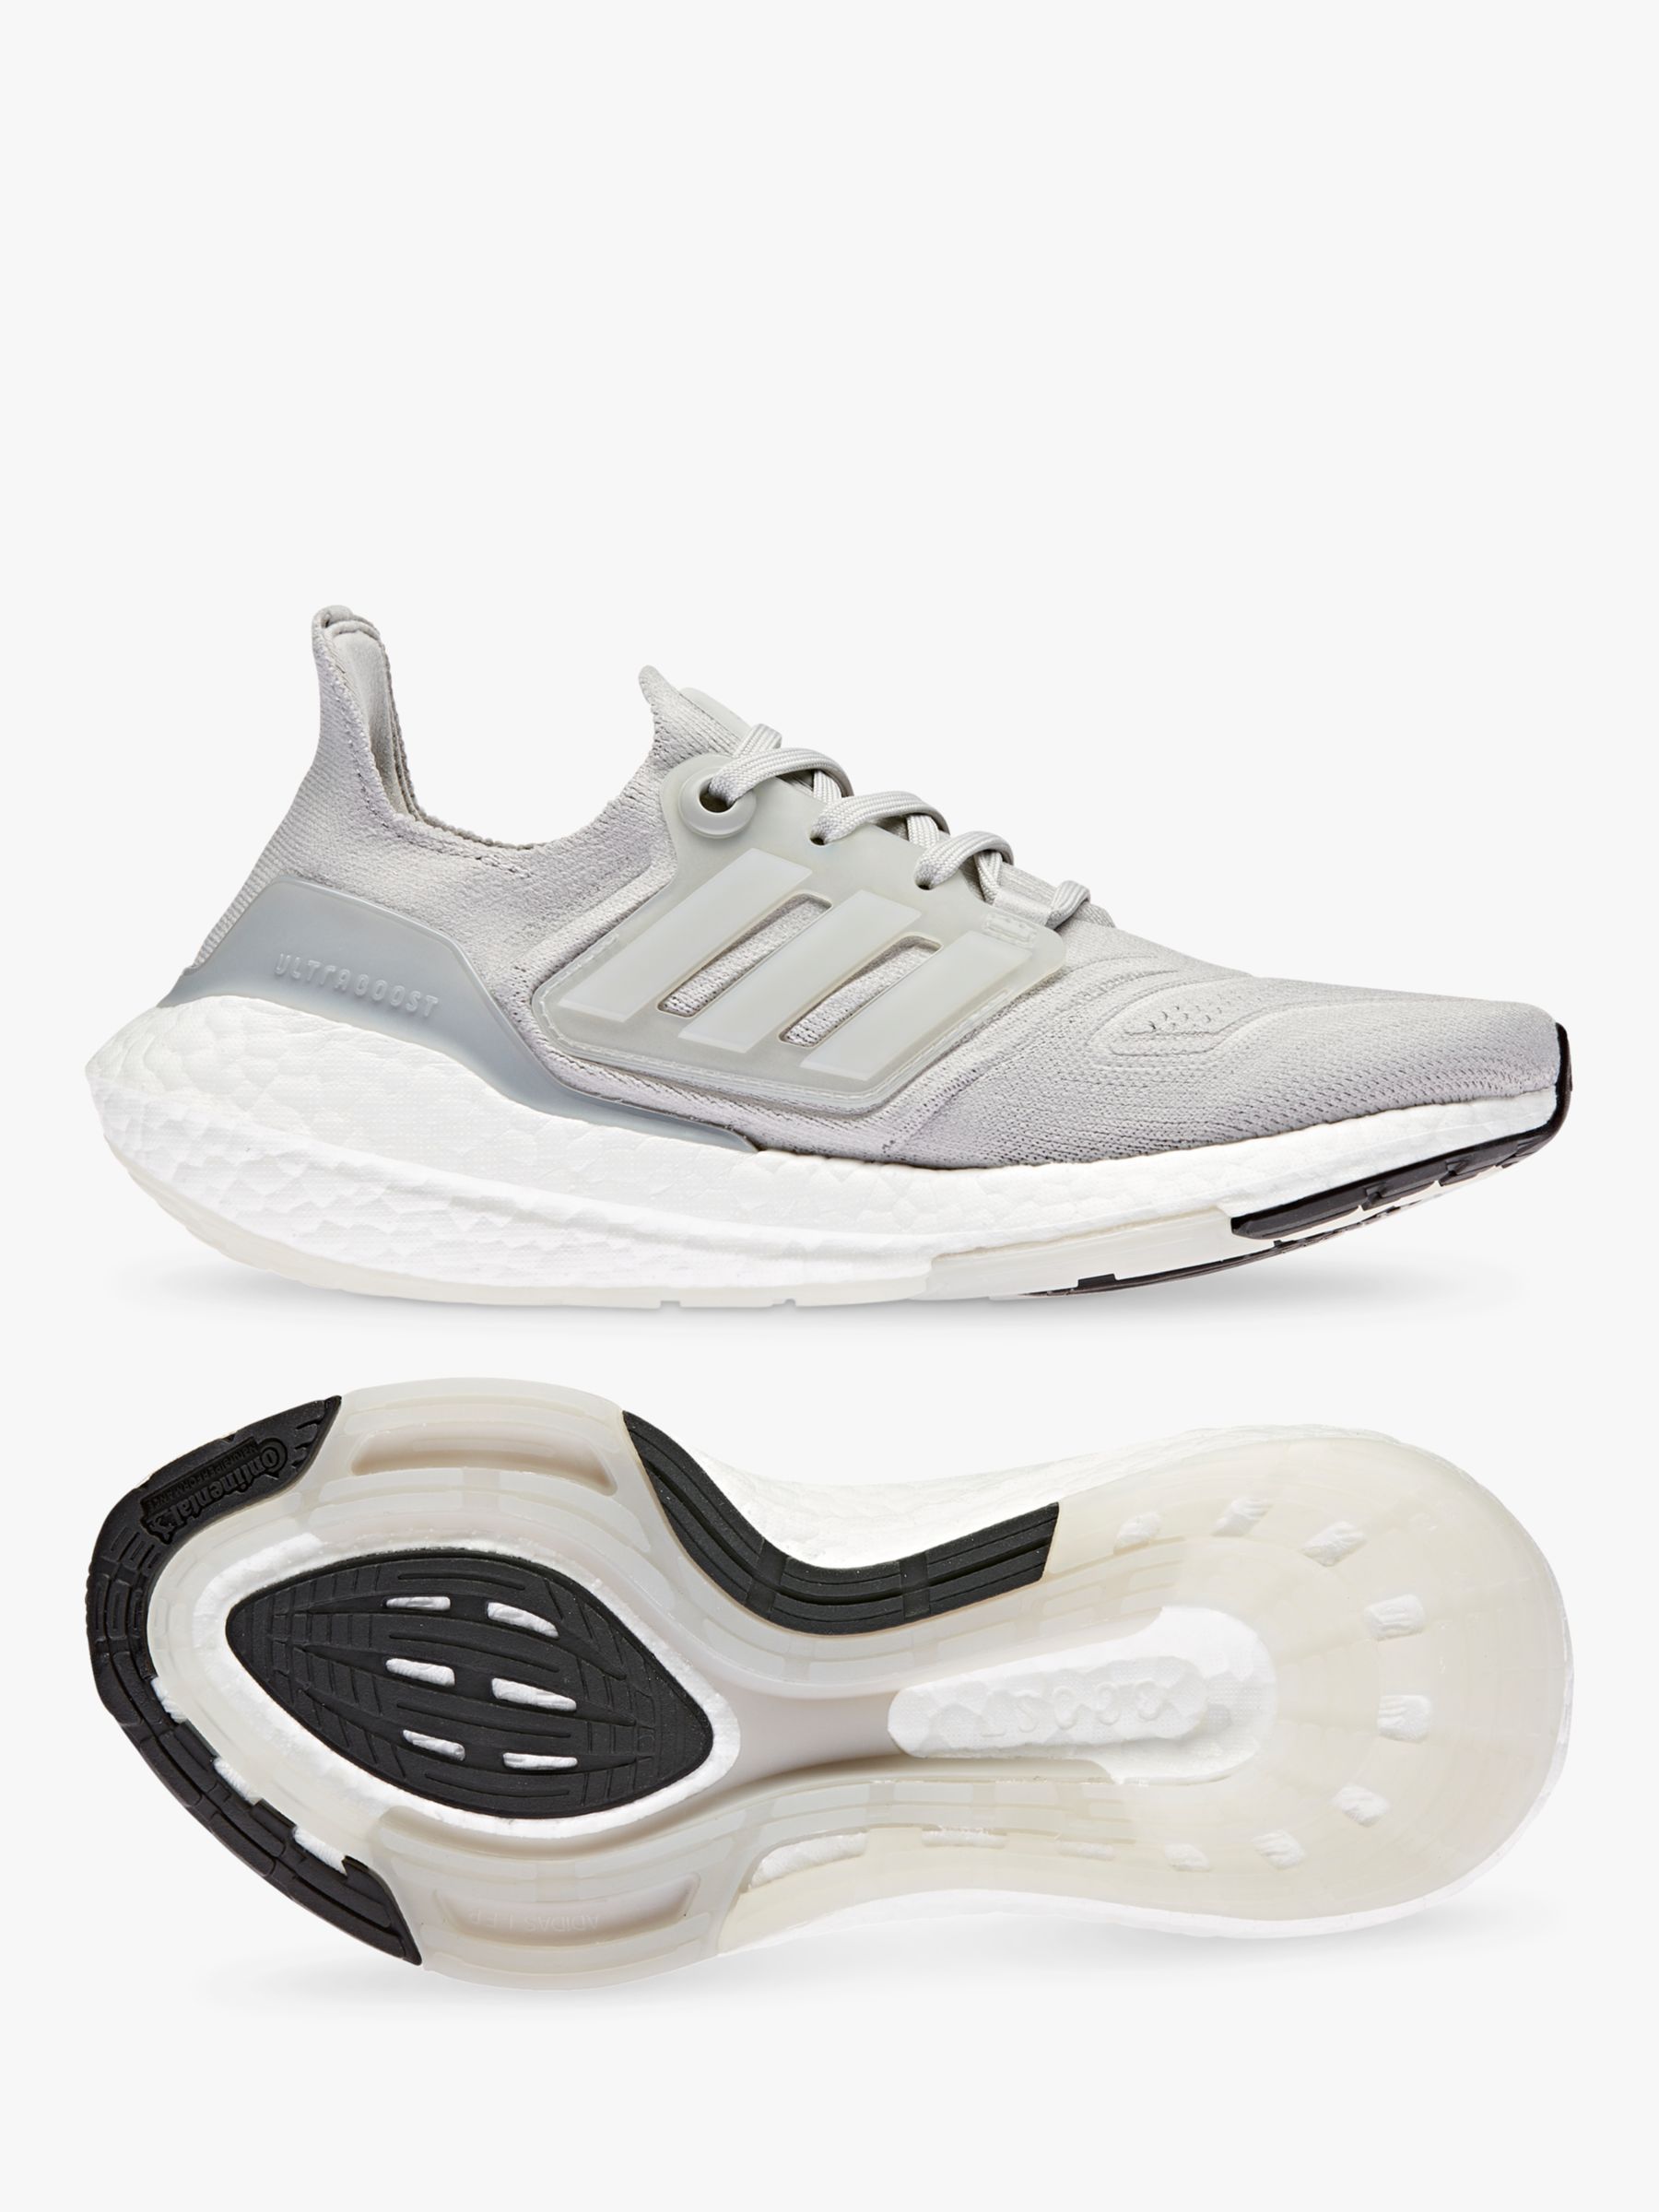 adidas UltraBoost 22 Women's Running Shoes, Grey Two/Grey Two at John Lewis Partners